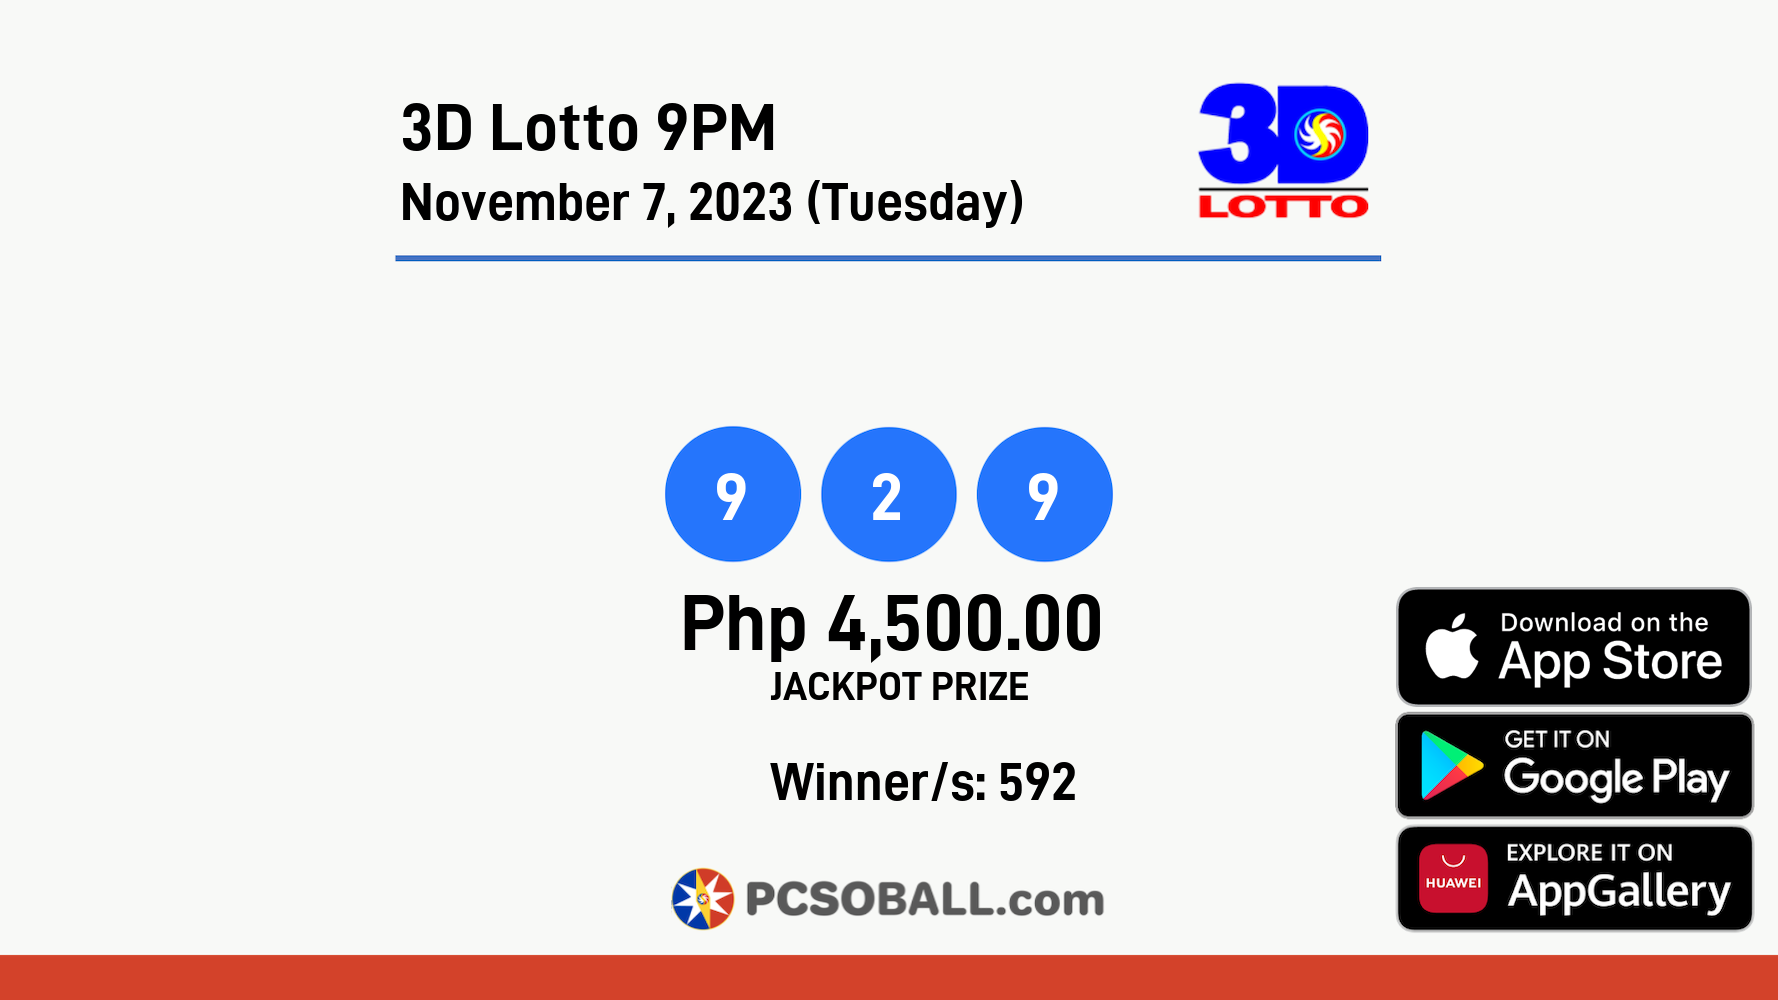 3D Lotto 9PM November 7, 2023 (Tuesday) Result